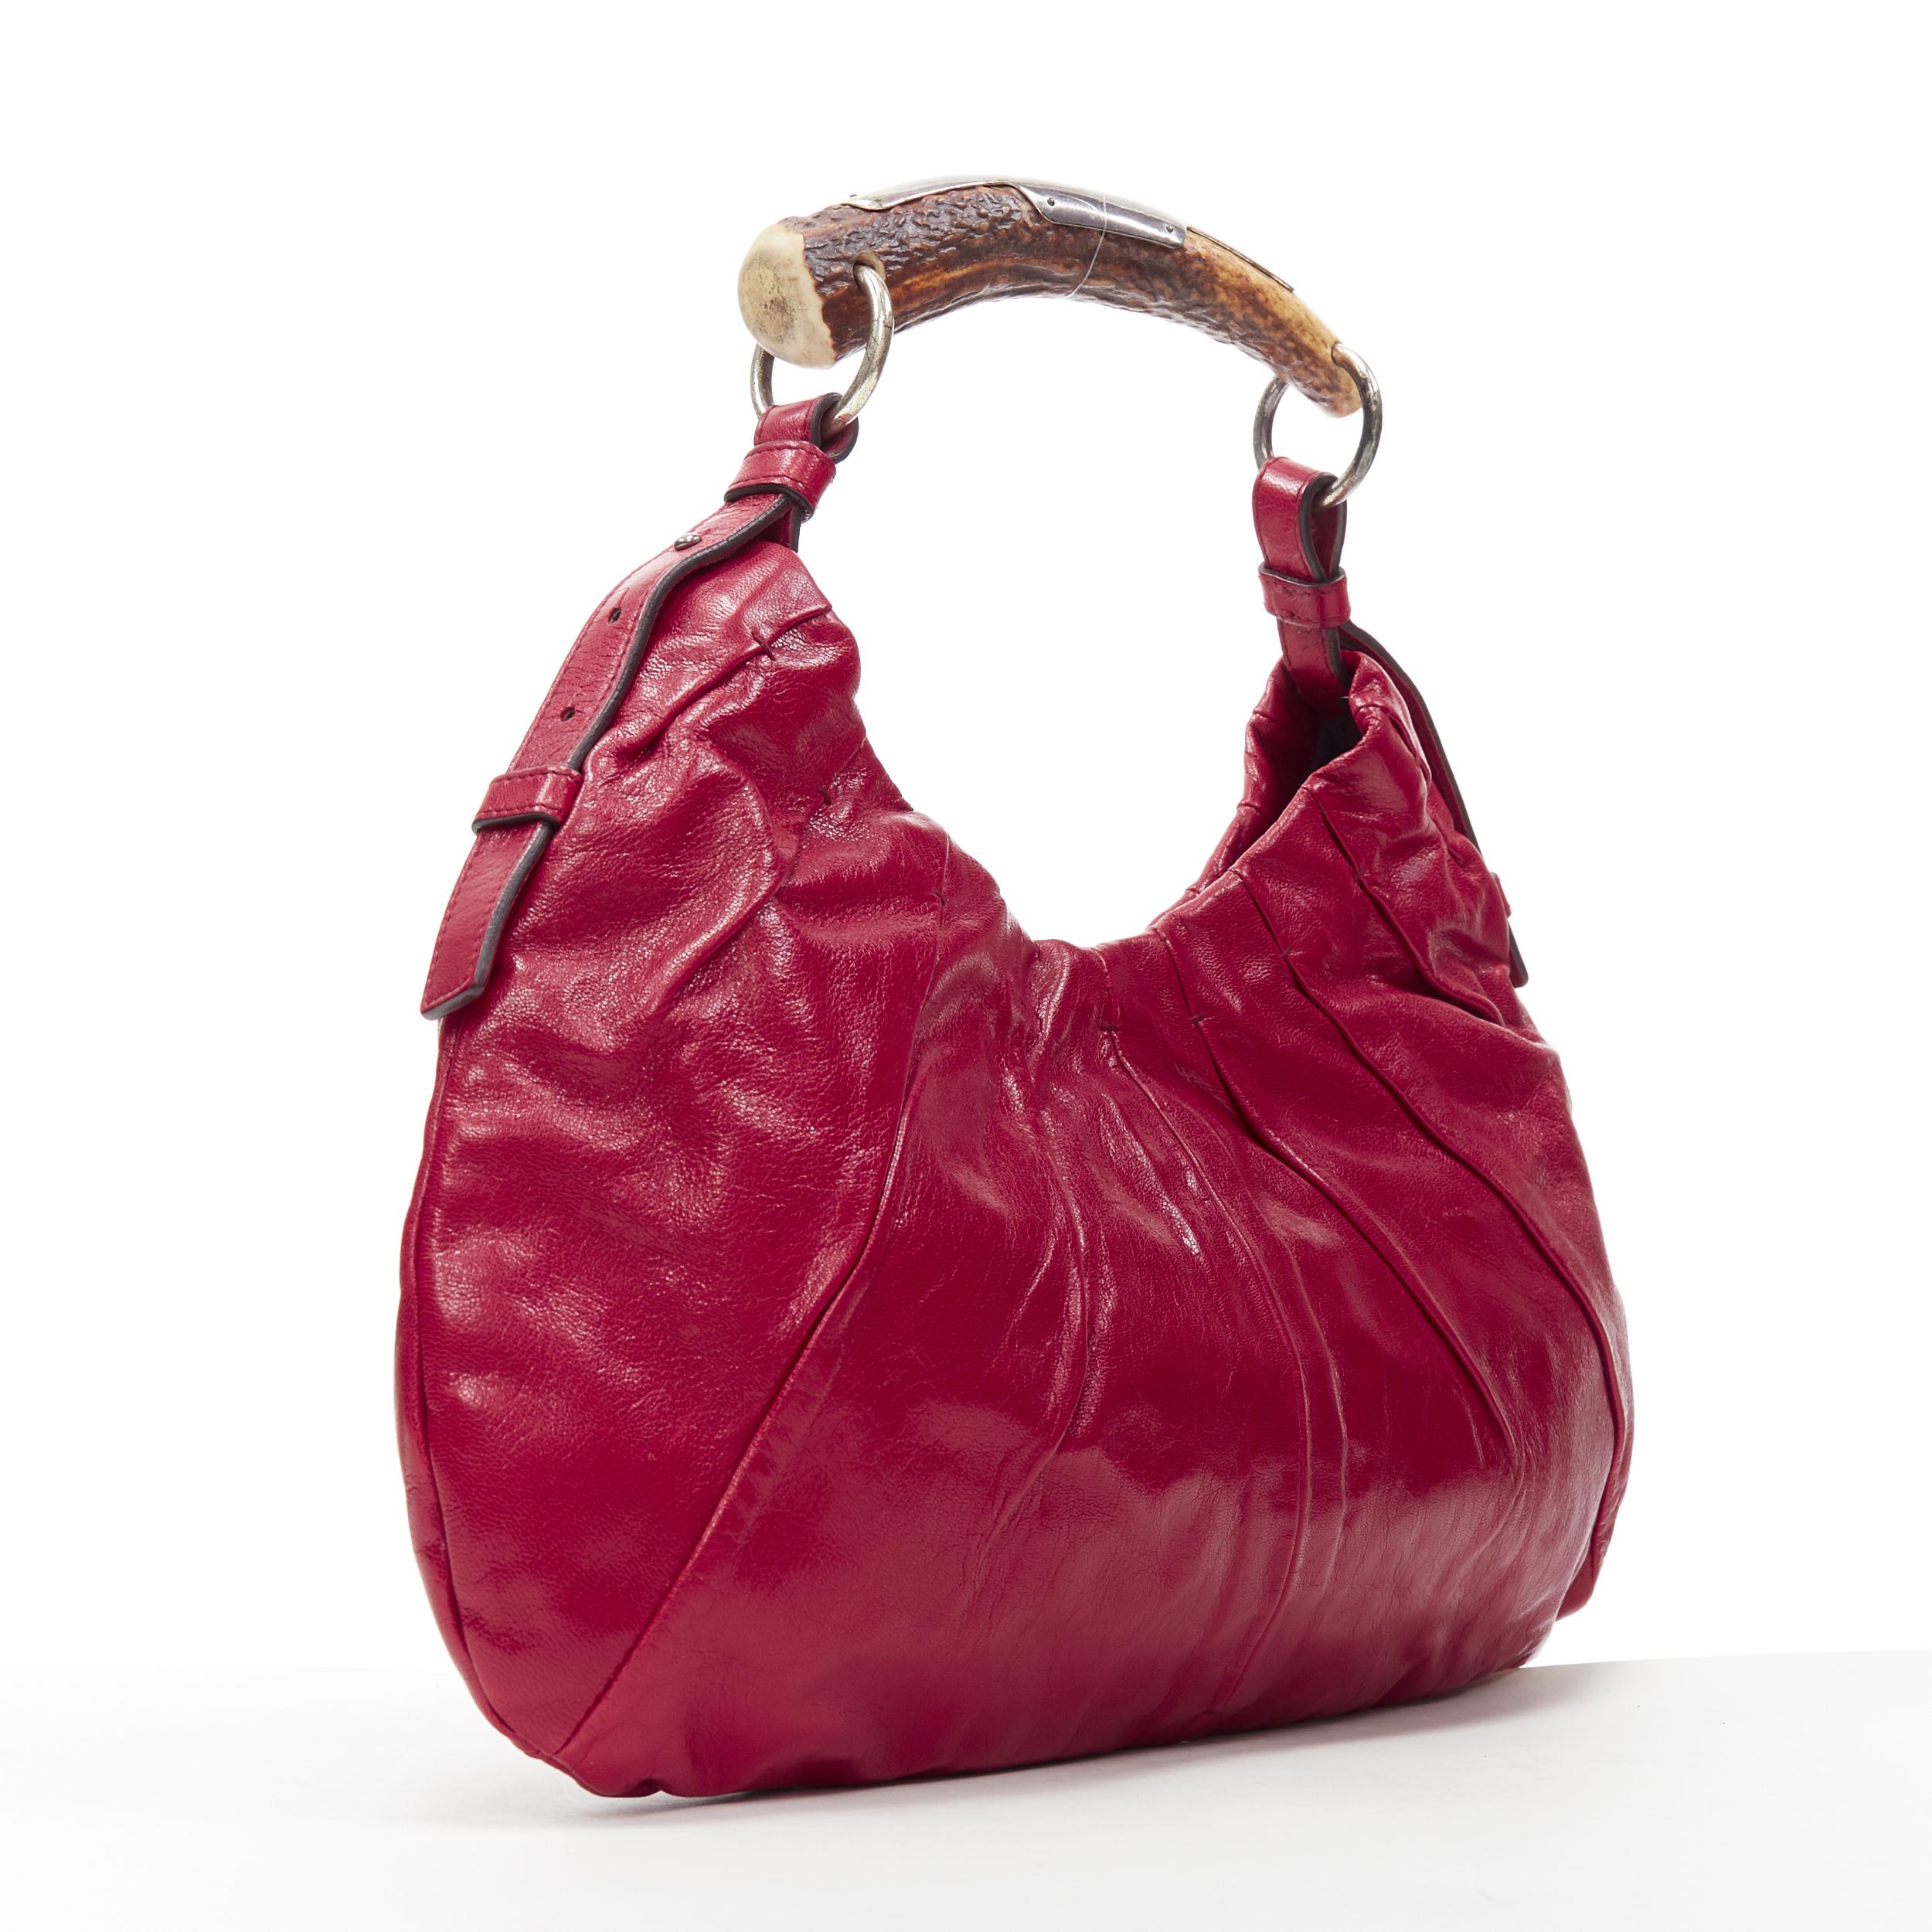 vintage YVES SAINT LAURENT Mombasa horn handle red leather shoulder hobo bag
Brand: Yves Saint Laurent
Model Name / Style: Mombasa
Material: Leather
Color: Red
Pattern: Solid
Closure: Magnetic
Extra Detail: Antique finish silver hardware.
Made in: